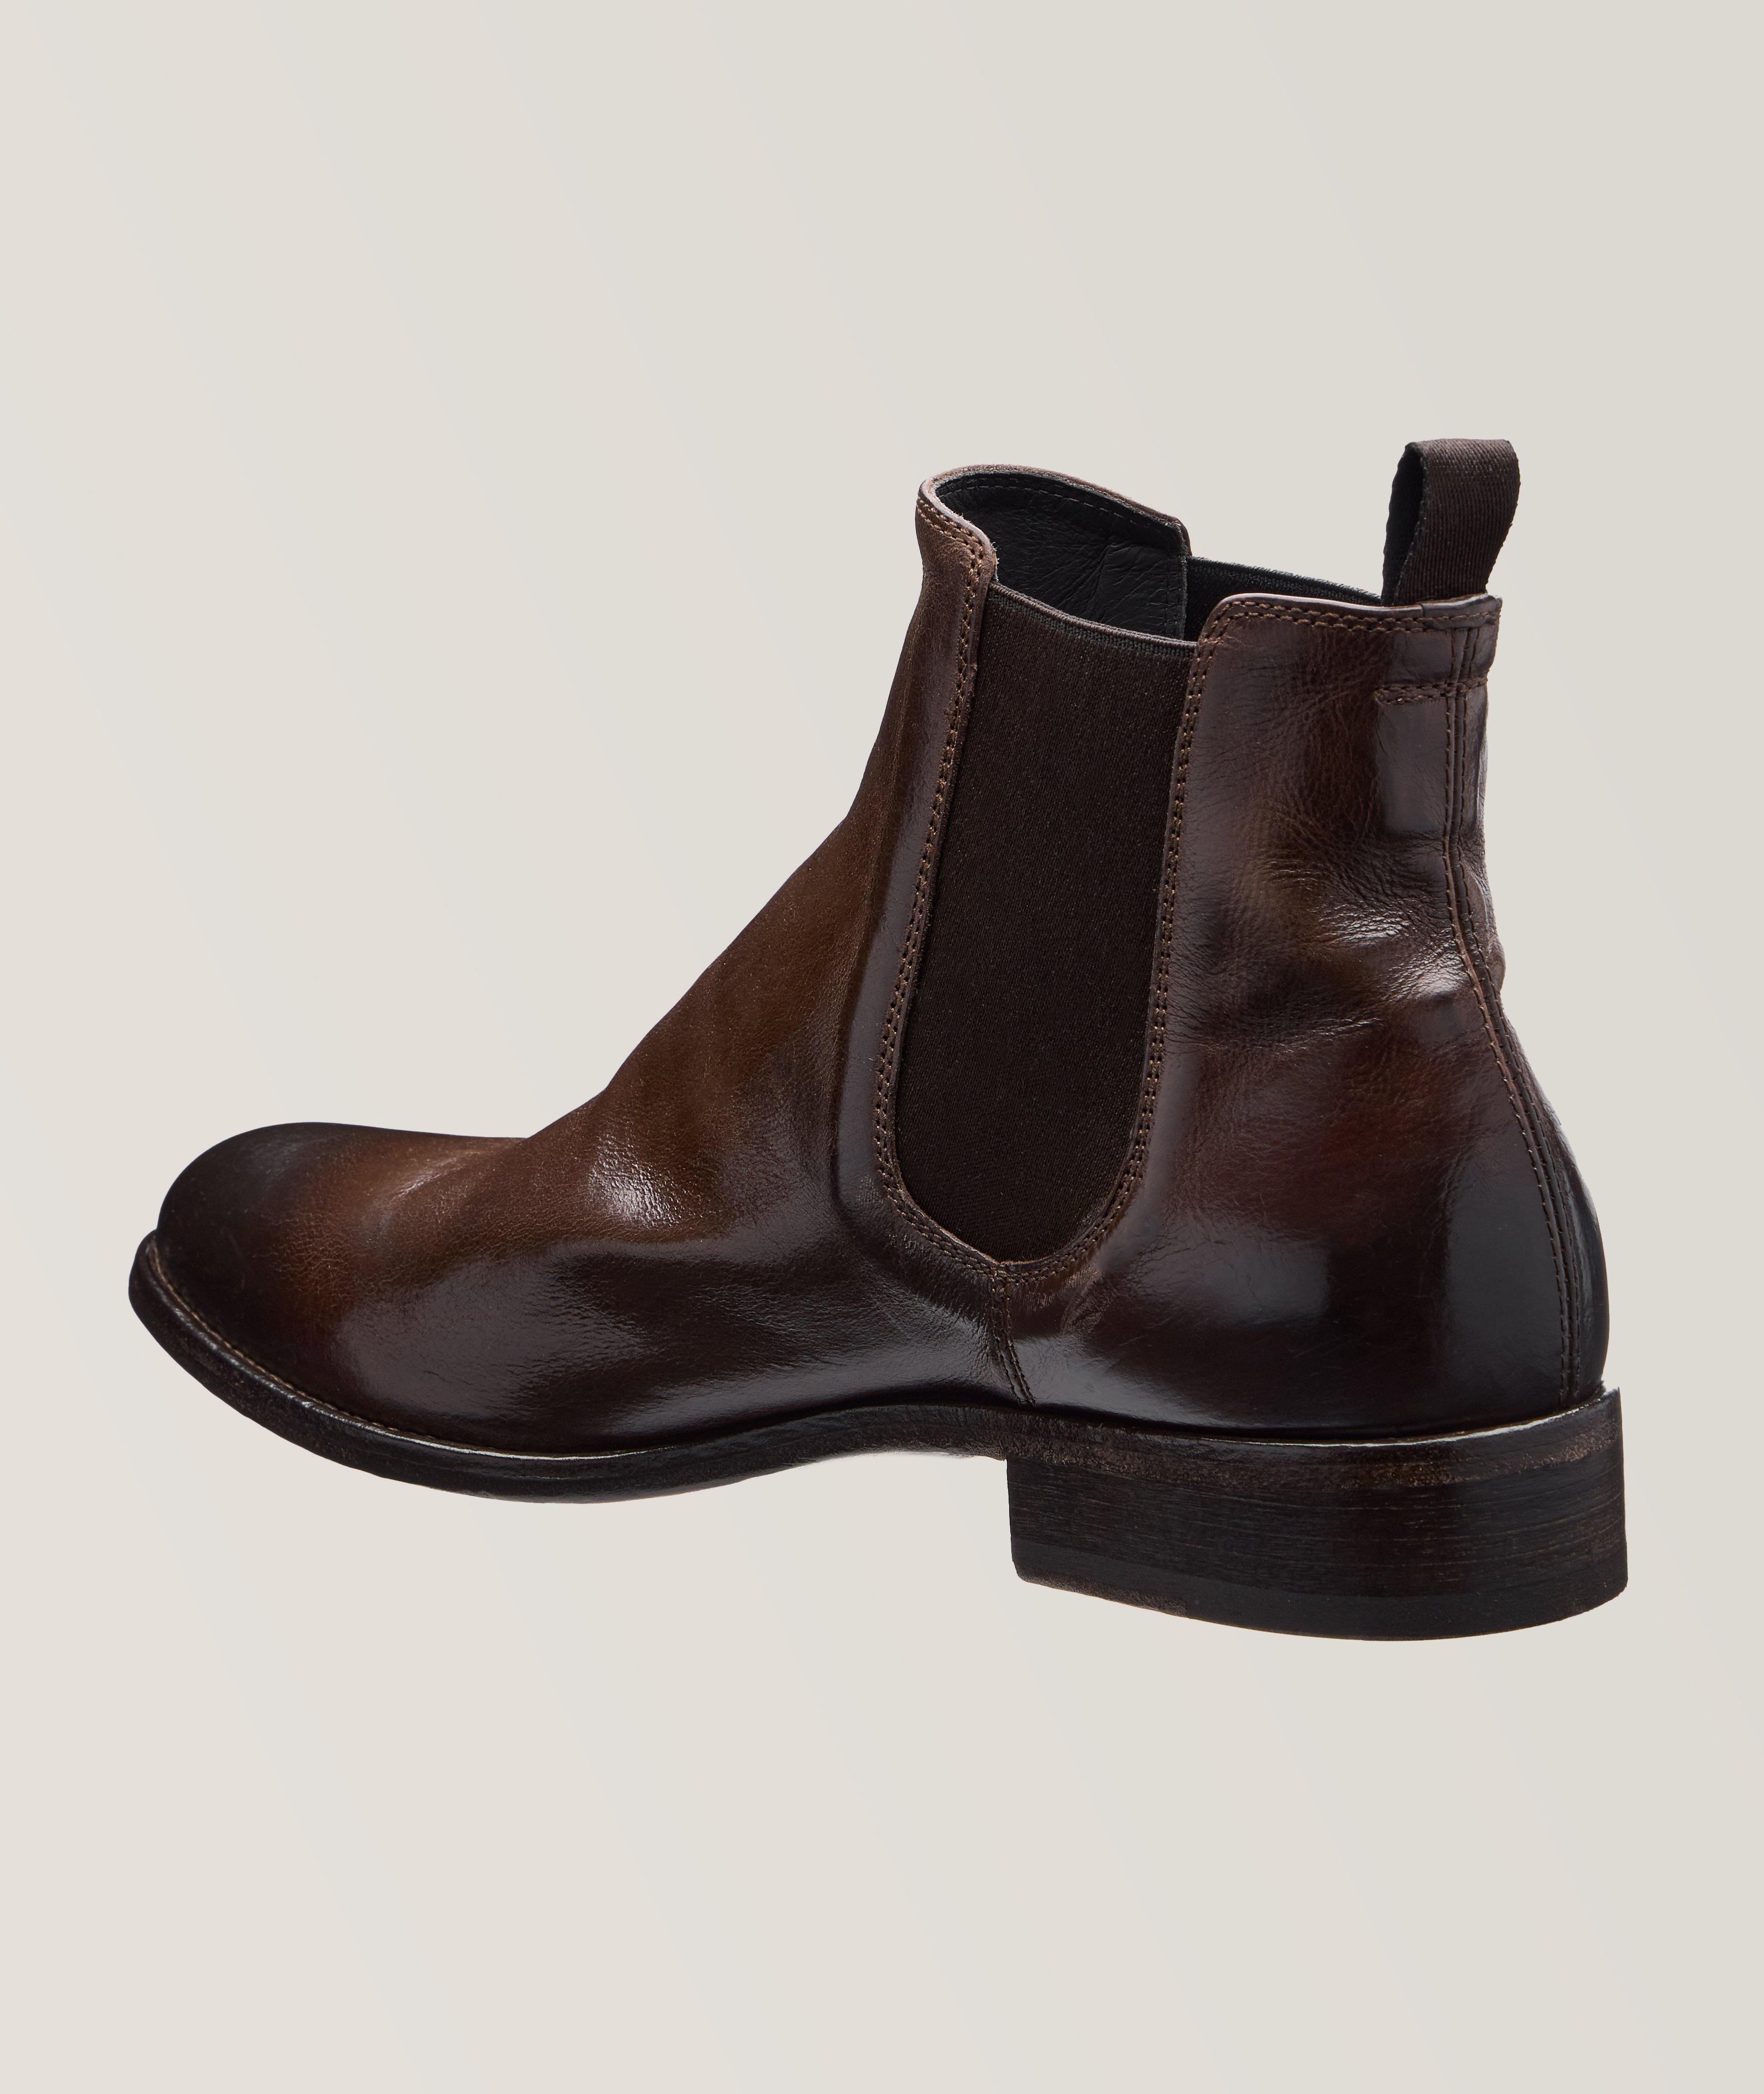 Bedell Leather Chelsea Boots image 1